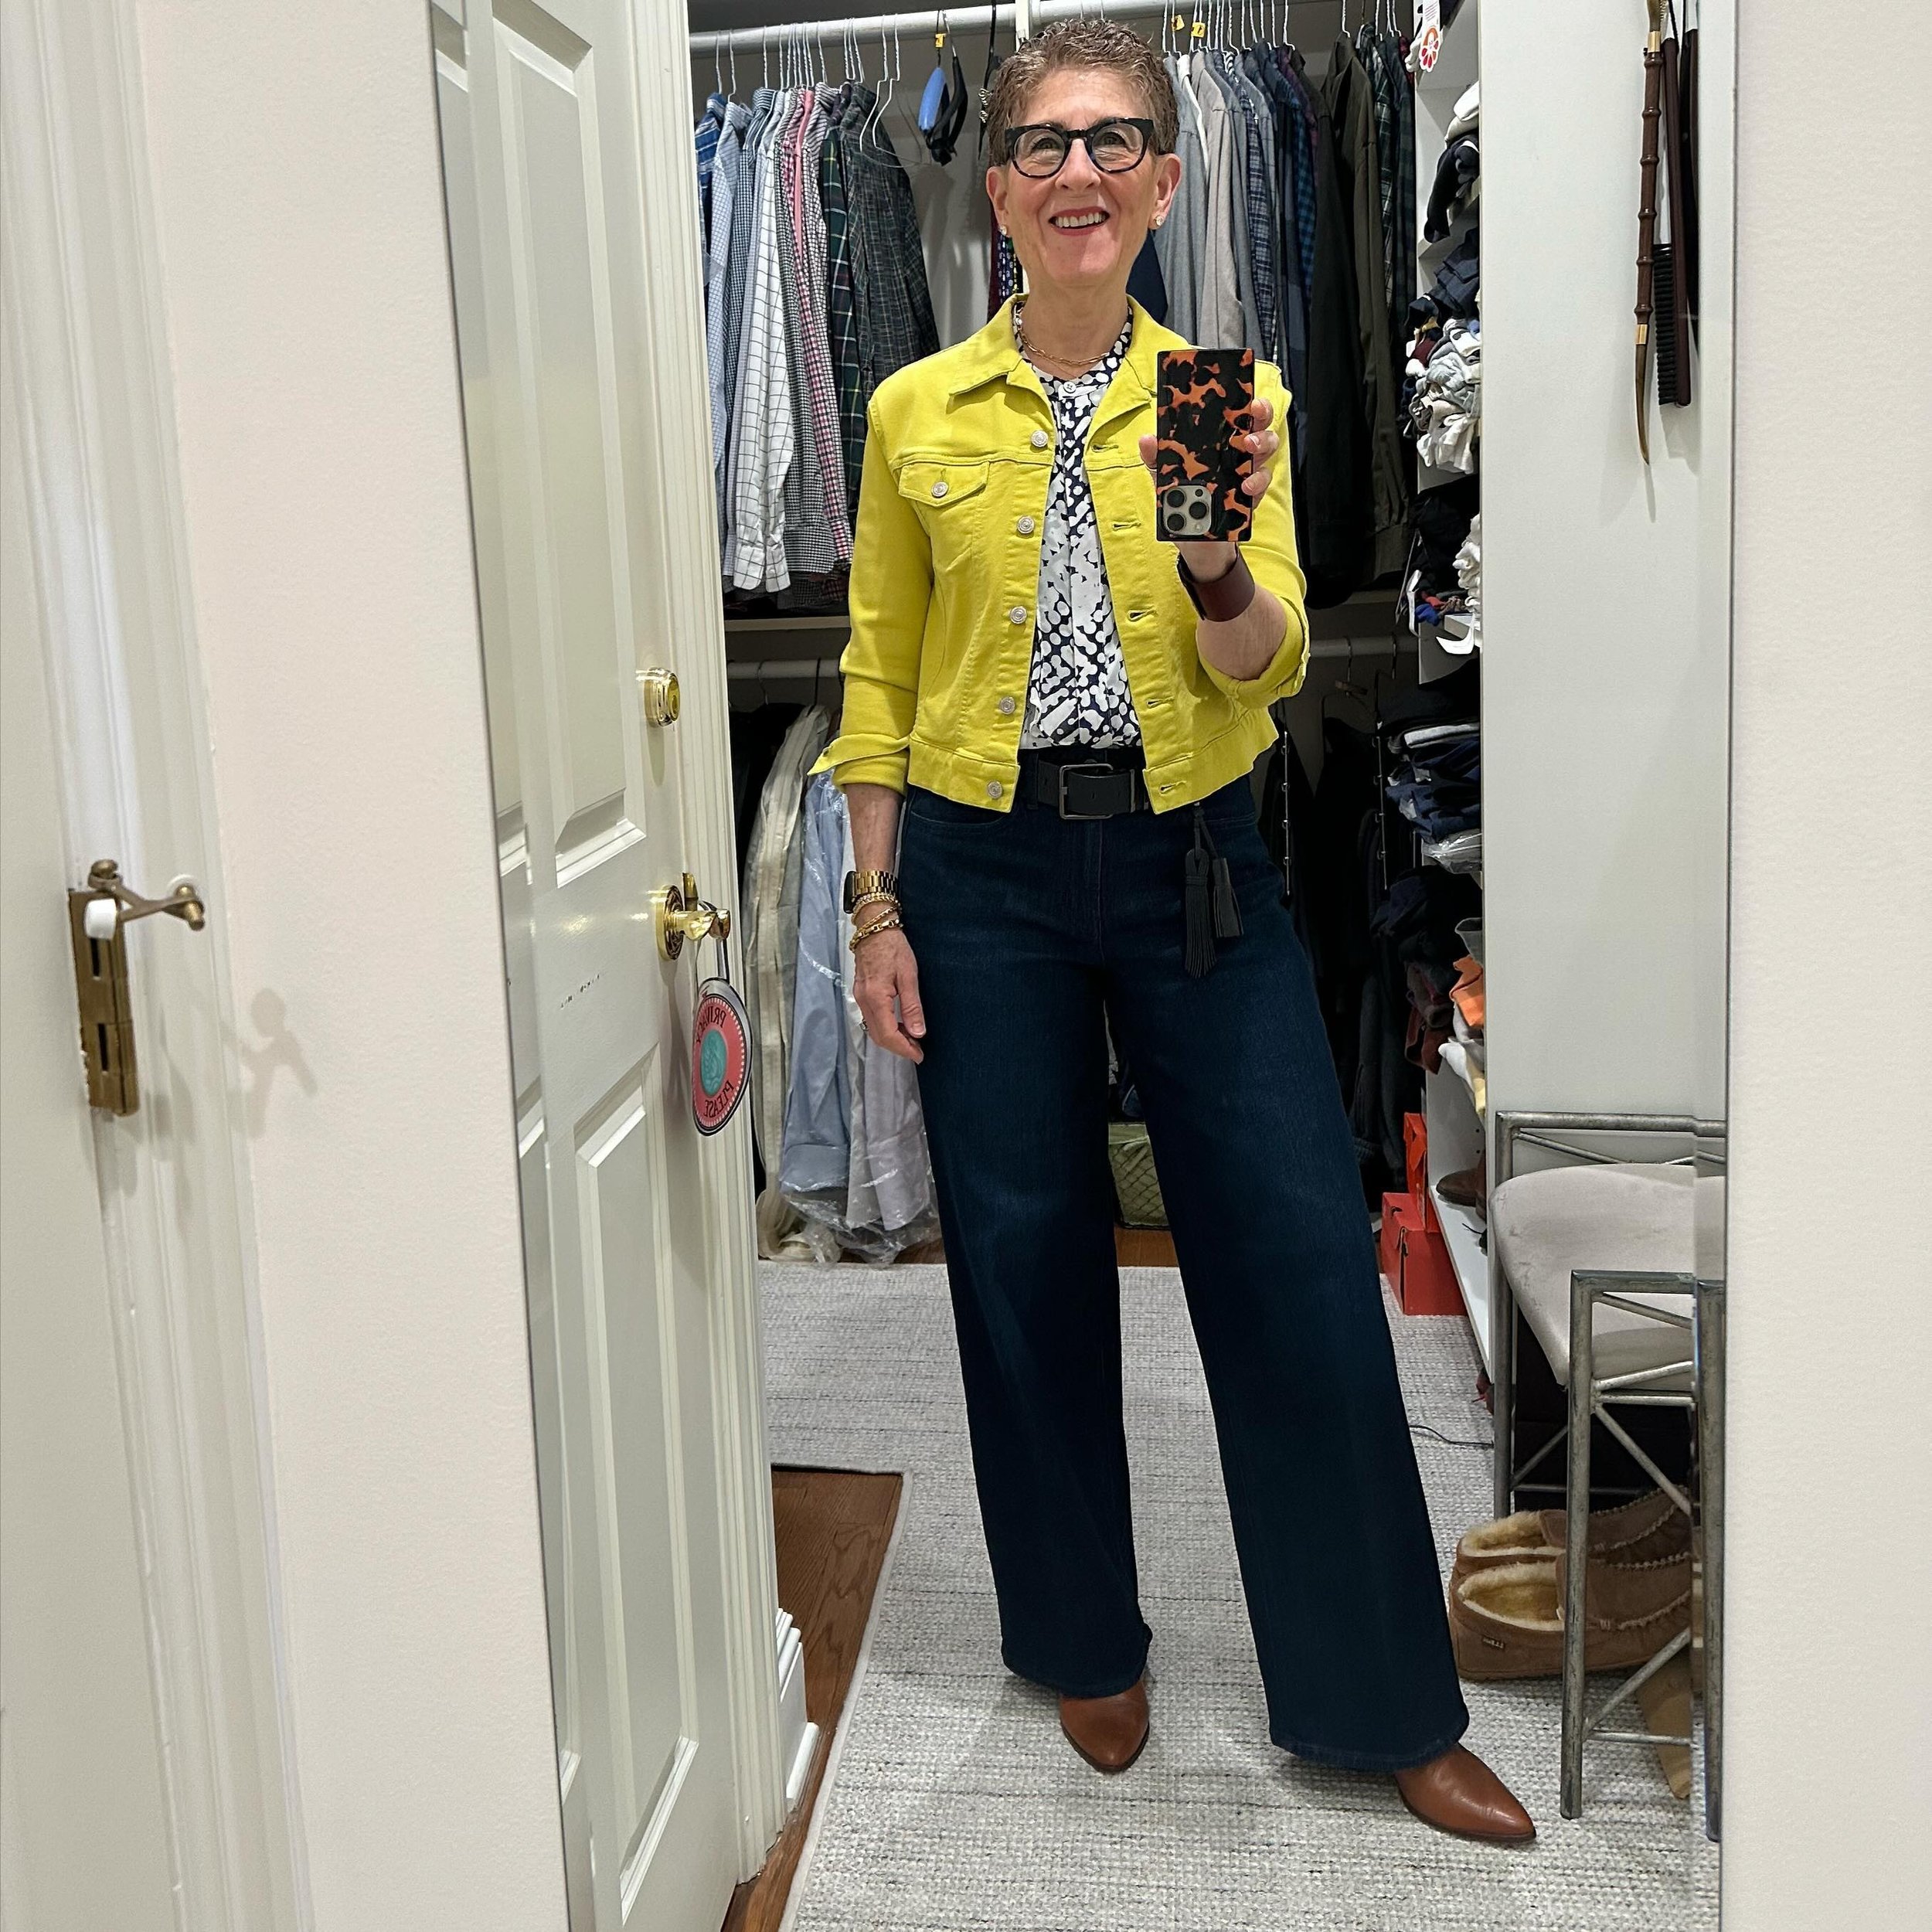 I began to build this look on a palette of just navy blue and white. But the weather here is dreary today and I felt like I needed a pop of bright. SO&hellip;I pulled out a citrus green denim jacket from my closet and ditched the white zippy jacket I